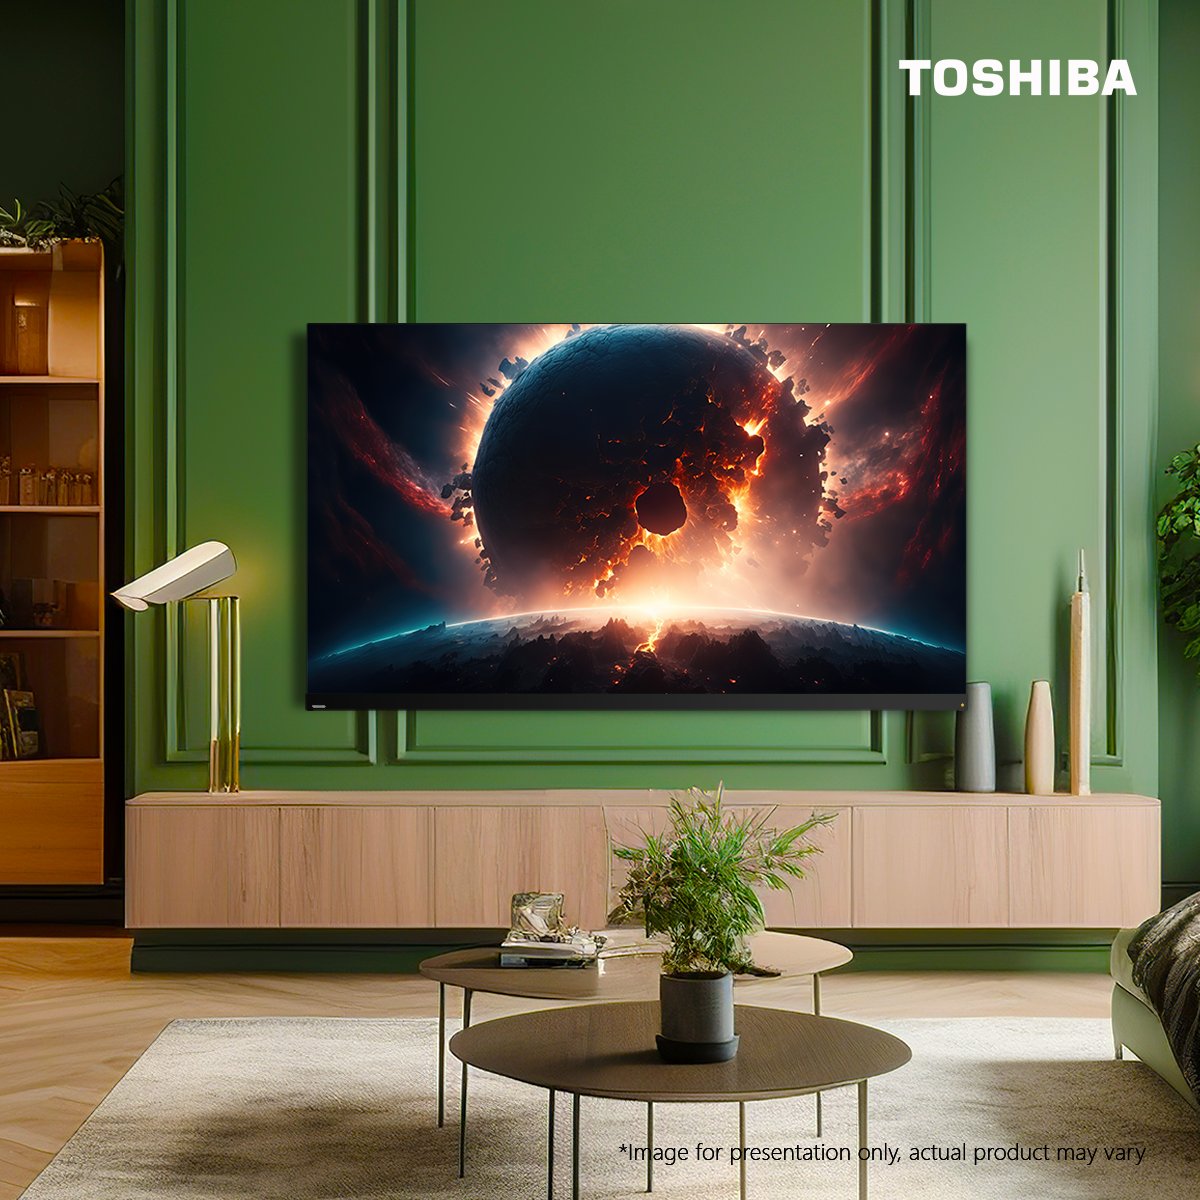 Enjoy the crispest audio even at the lowest of volumes.

Built with a chip algorithm that intelligently reproduces sounds from diverse frequency bands, your Toshiba TV composes clear and layered sound for night-friendly entertainment.
#HomeEntertainment #ToshibaTV